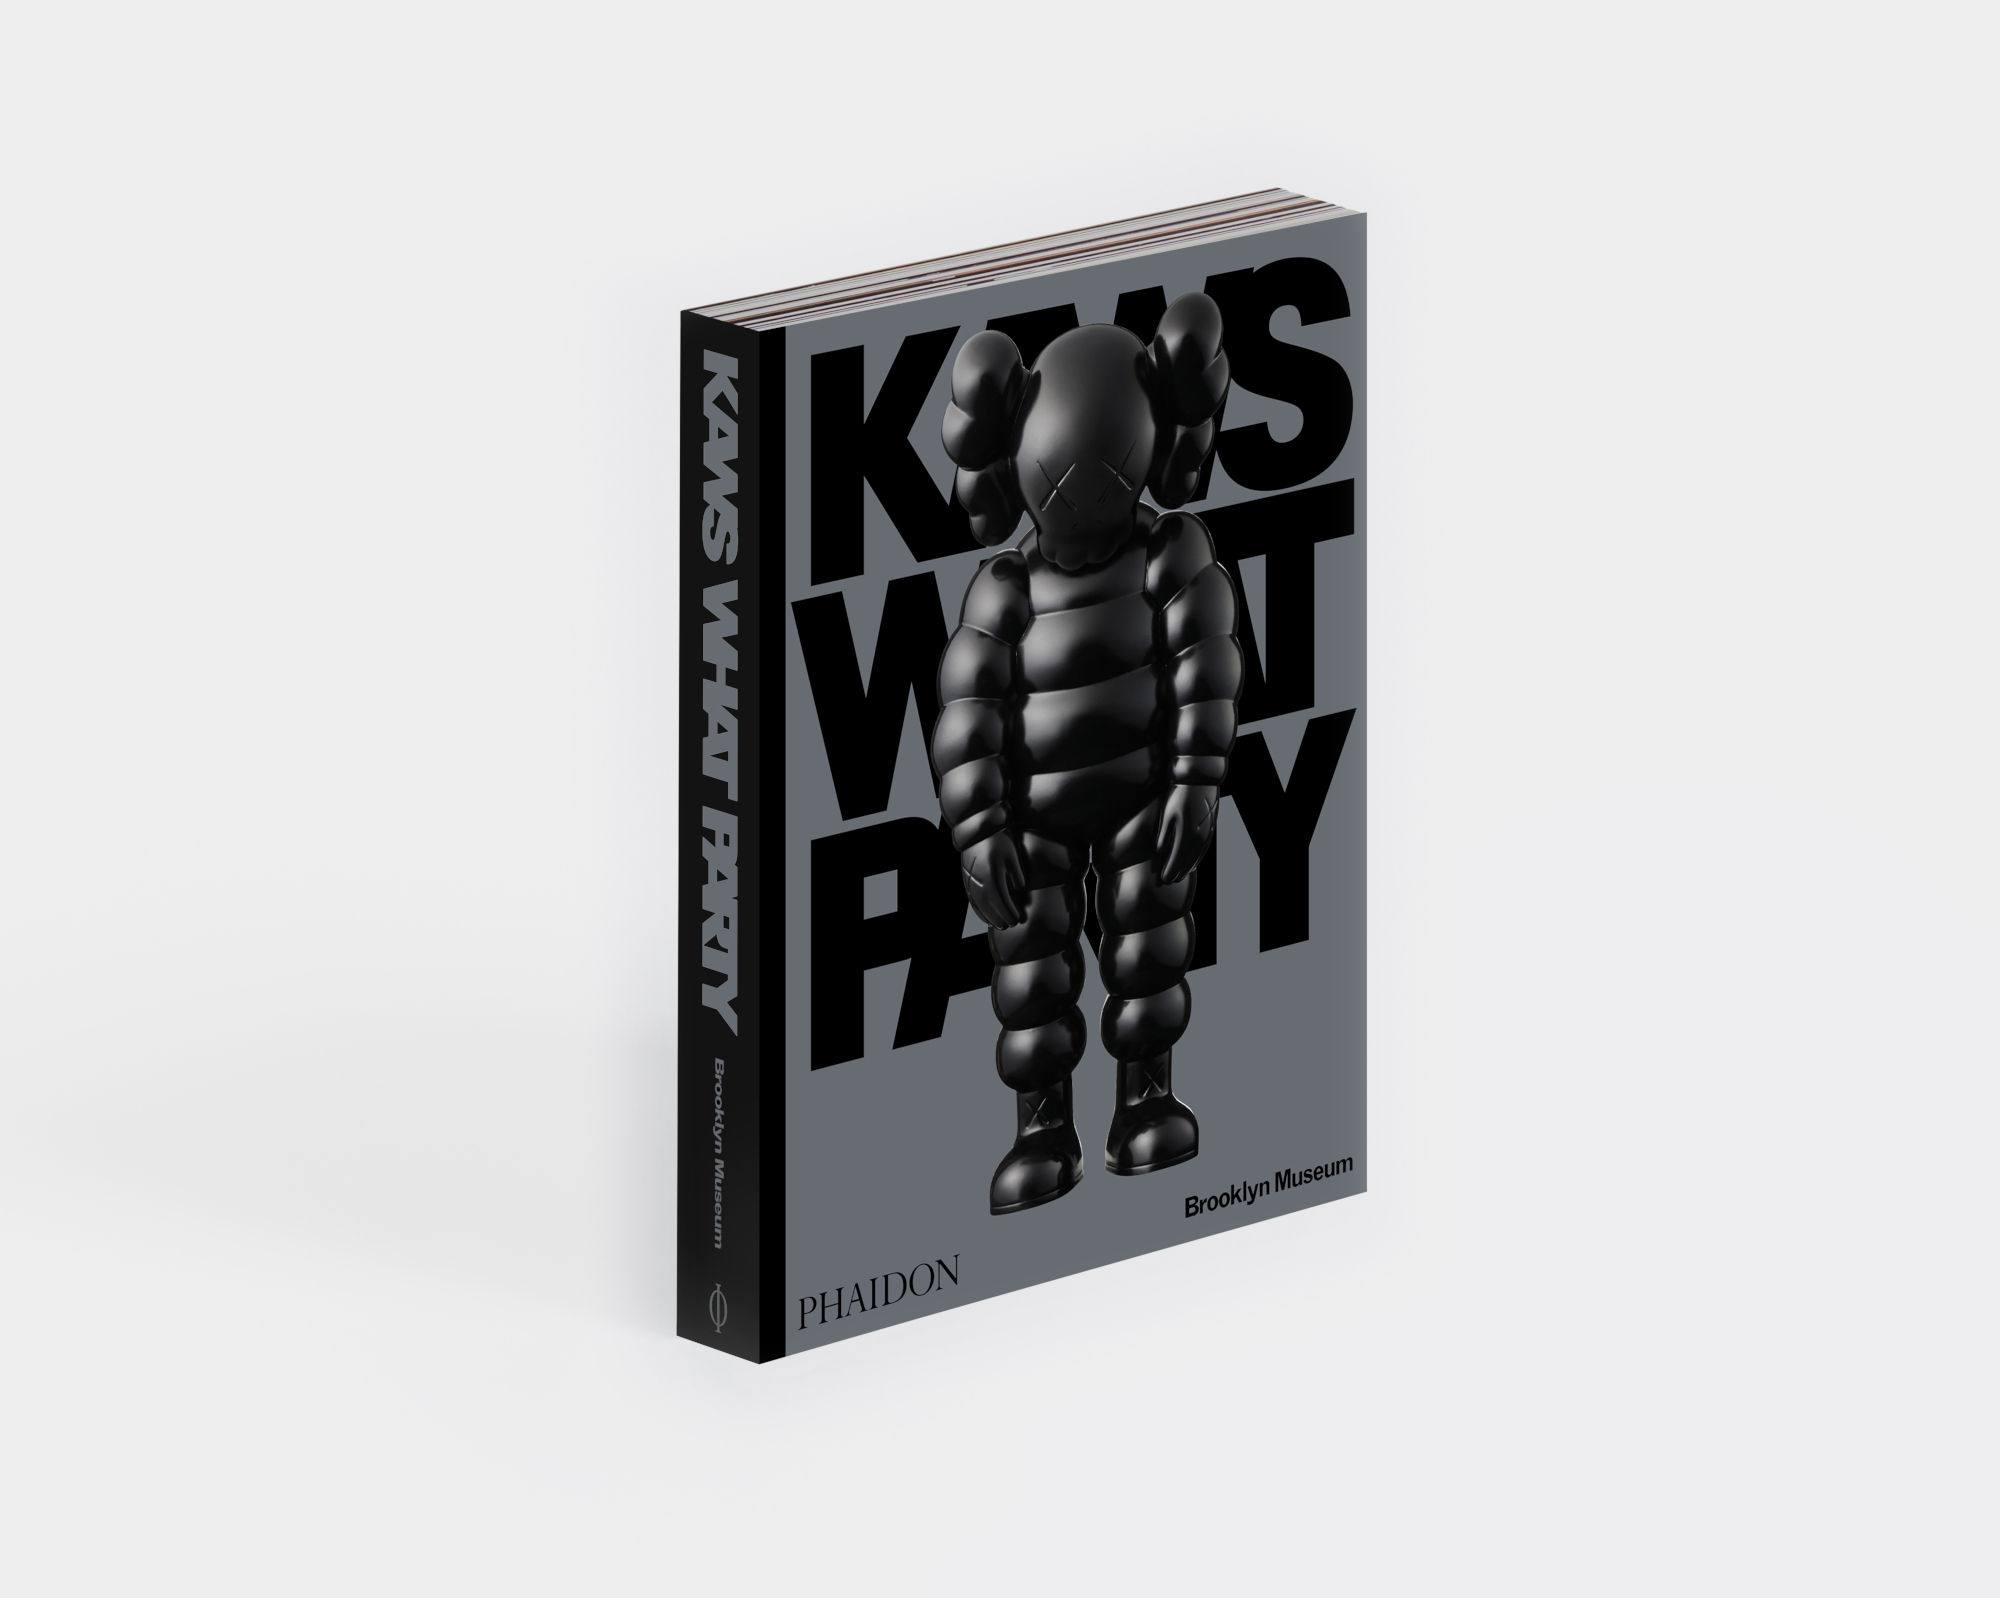 The black edition of KAWS: WHAT PARTY